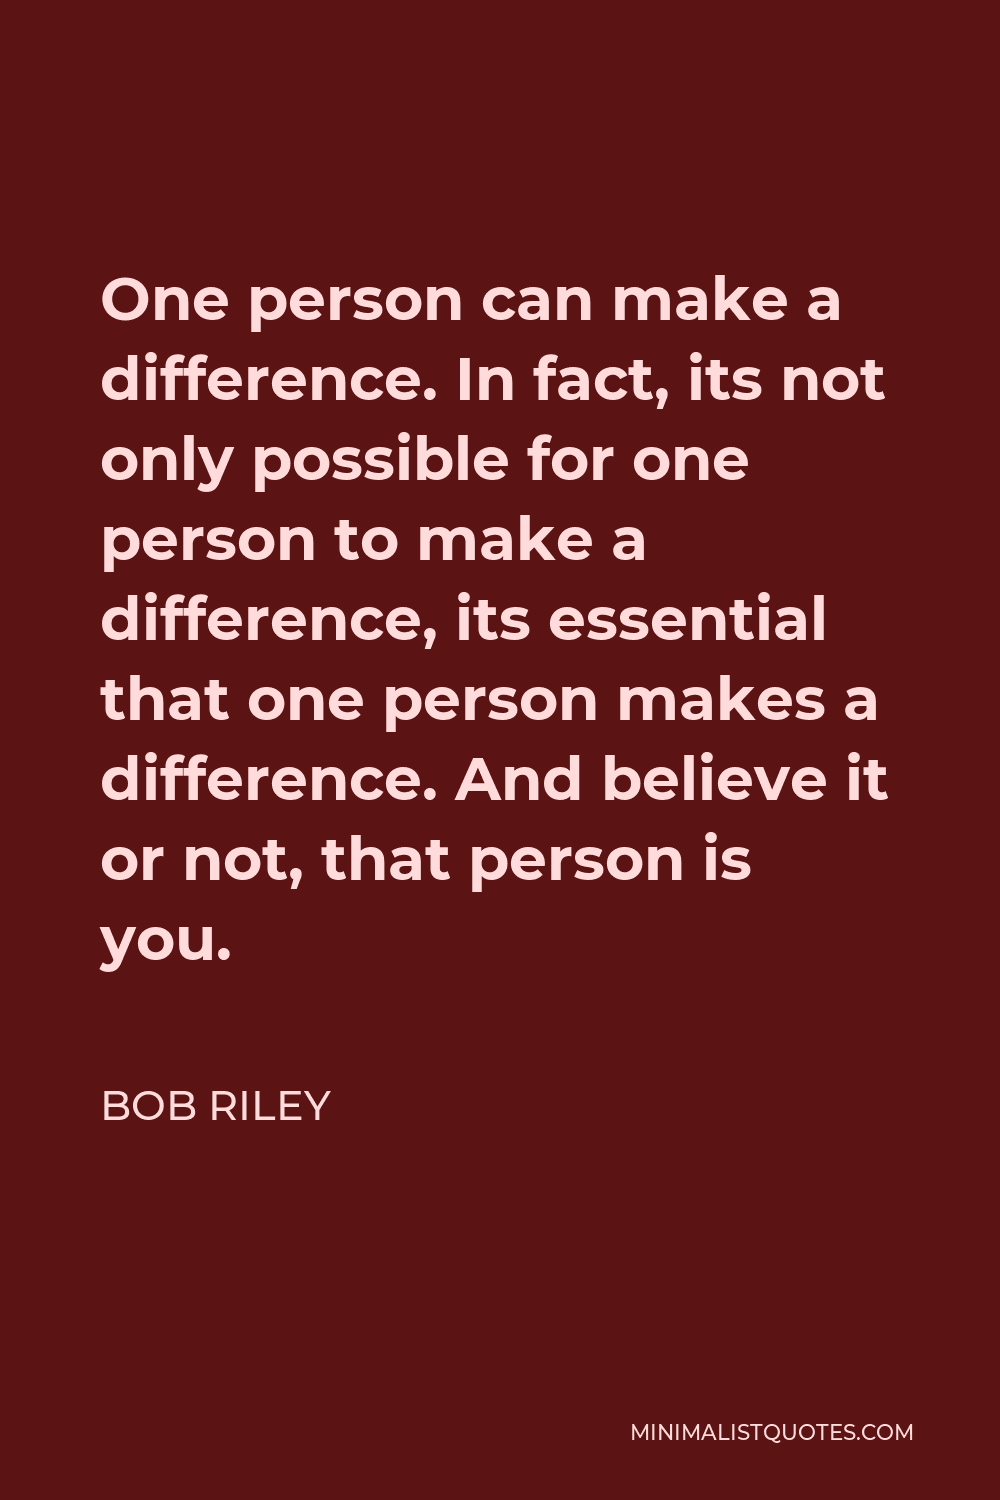 Bob Riley Quote - One person can make a difference. In fact, its not only possible for one person to make a difference, its essential that one person makes a difference. And believe it or not, that person is you.